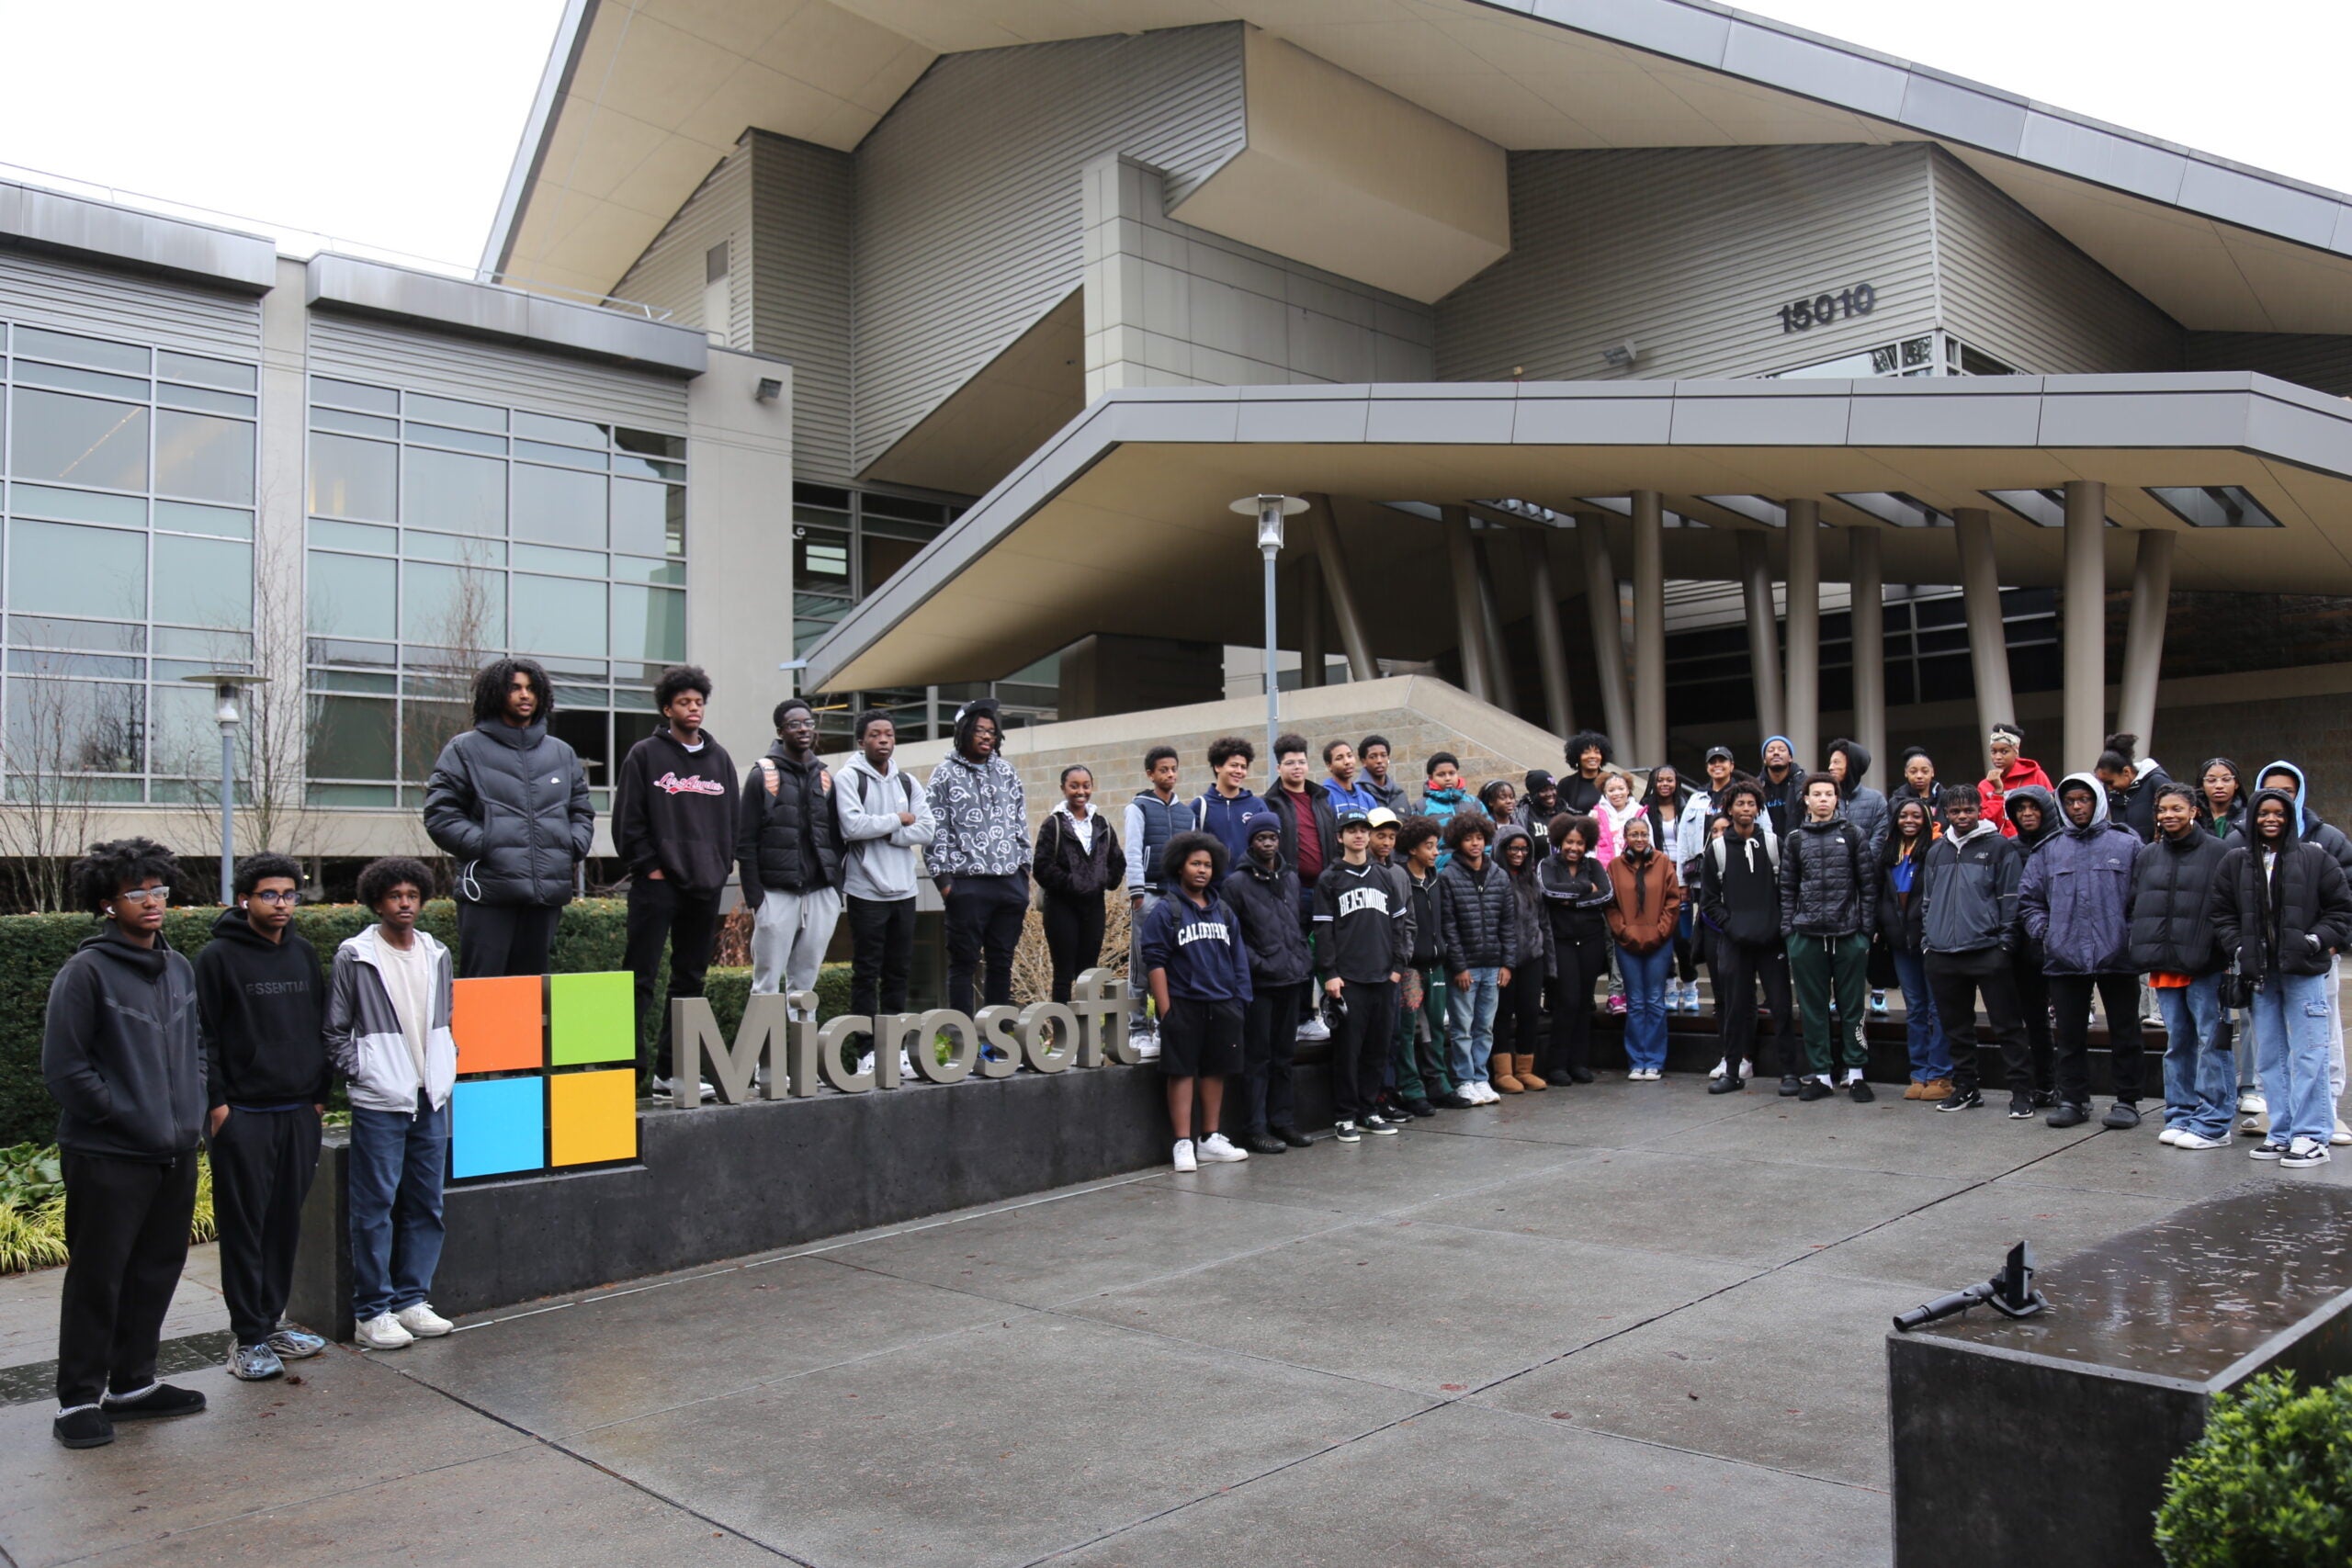 AAMA Students stand outside Microsoft, near a giant Microsoft sign.